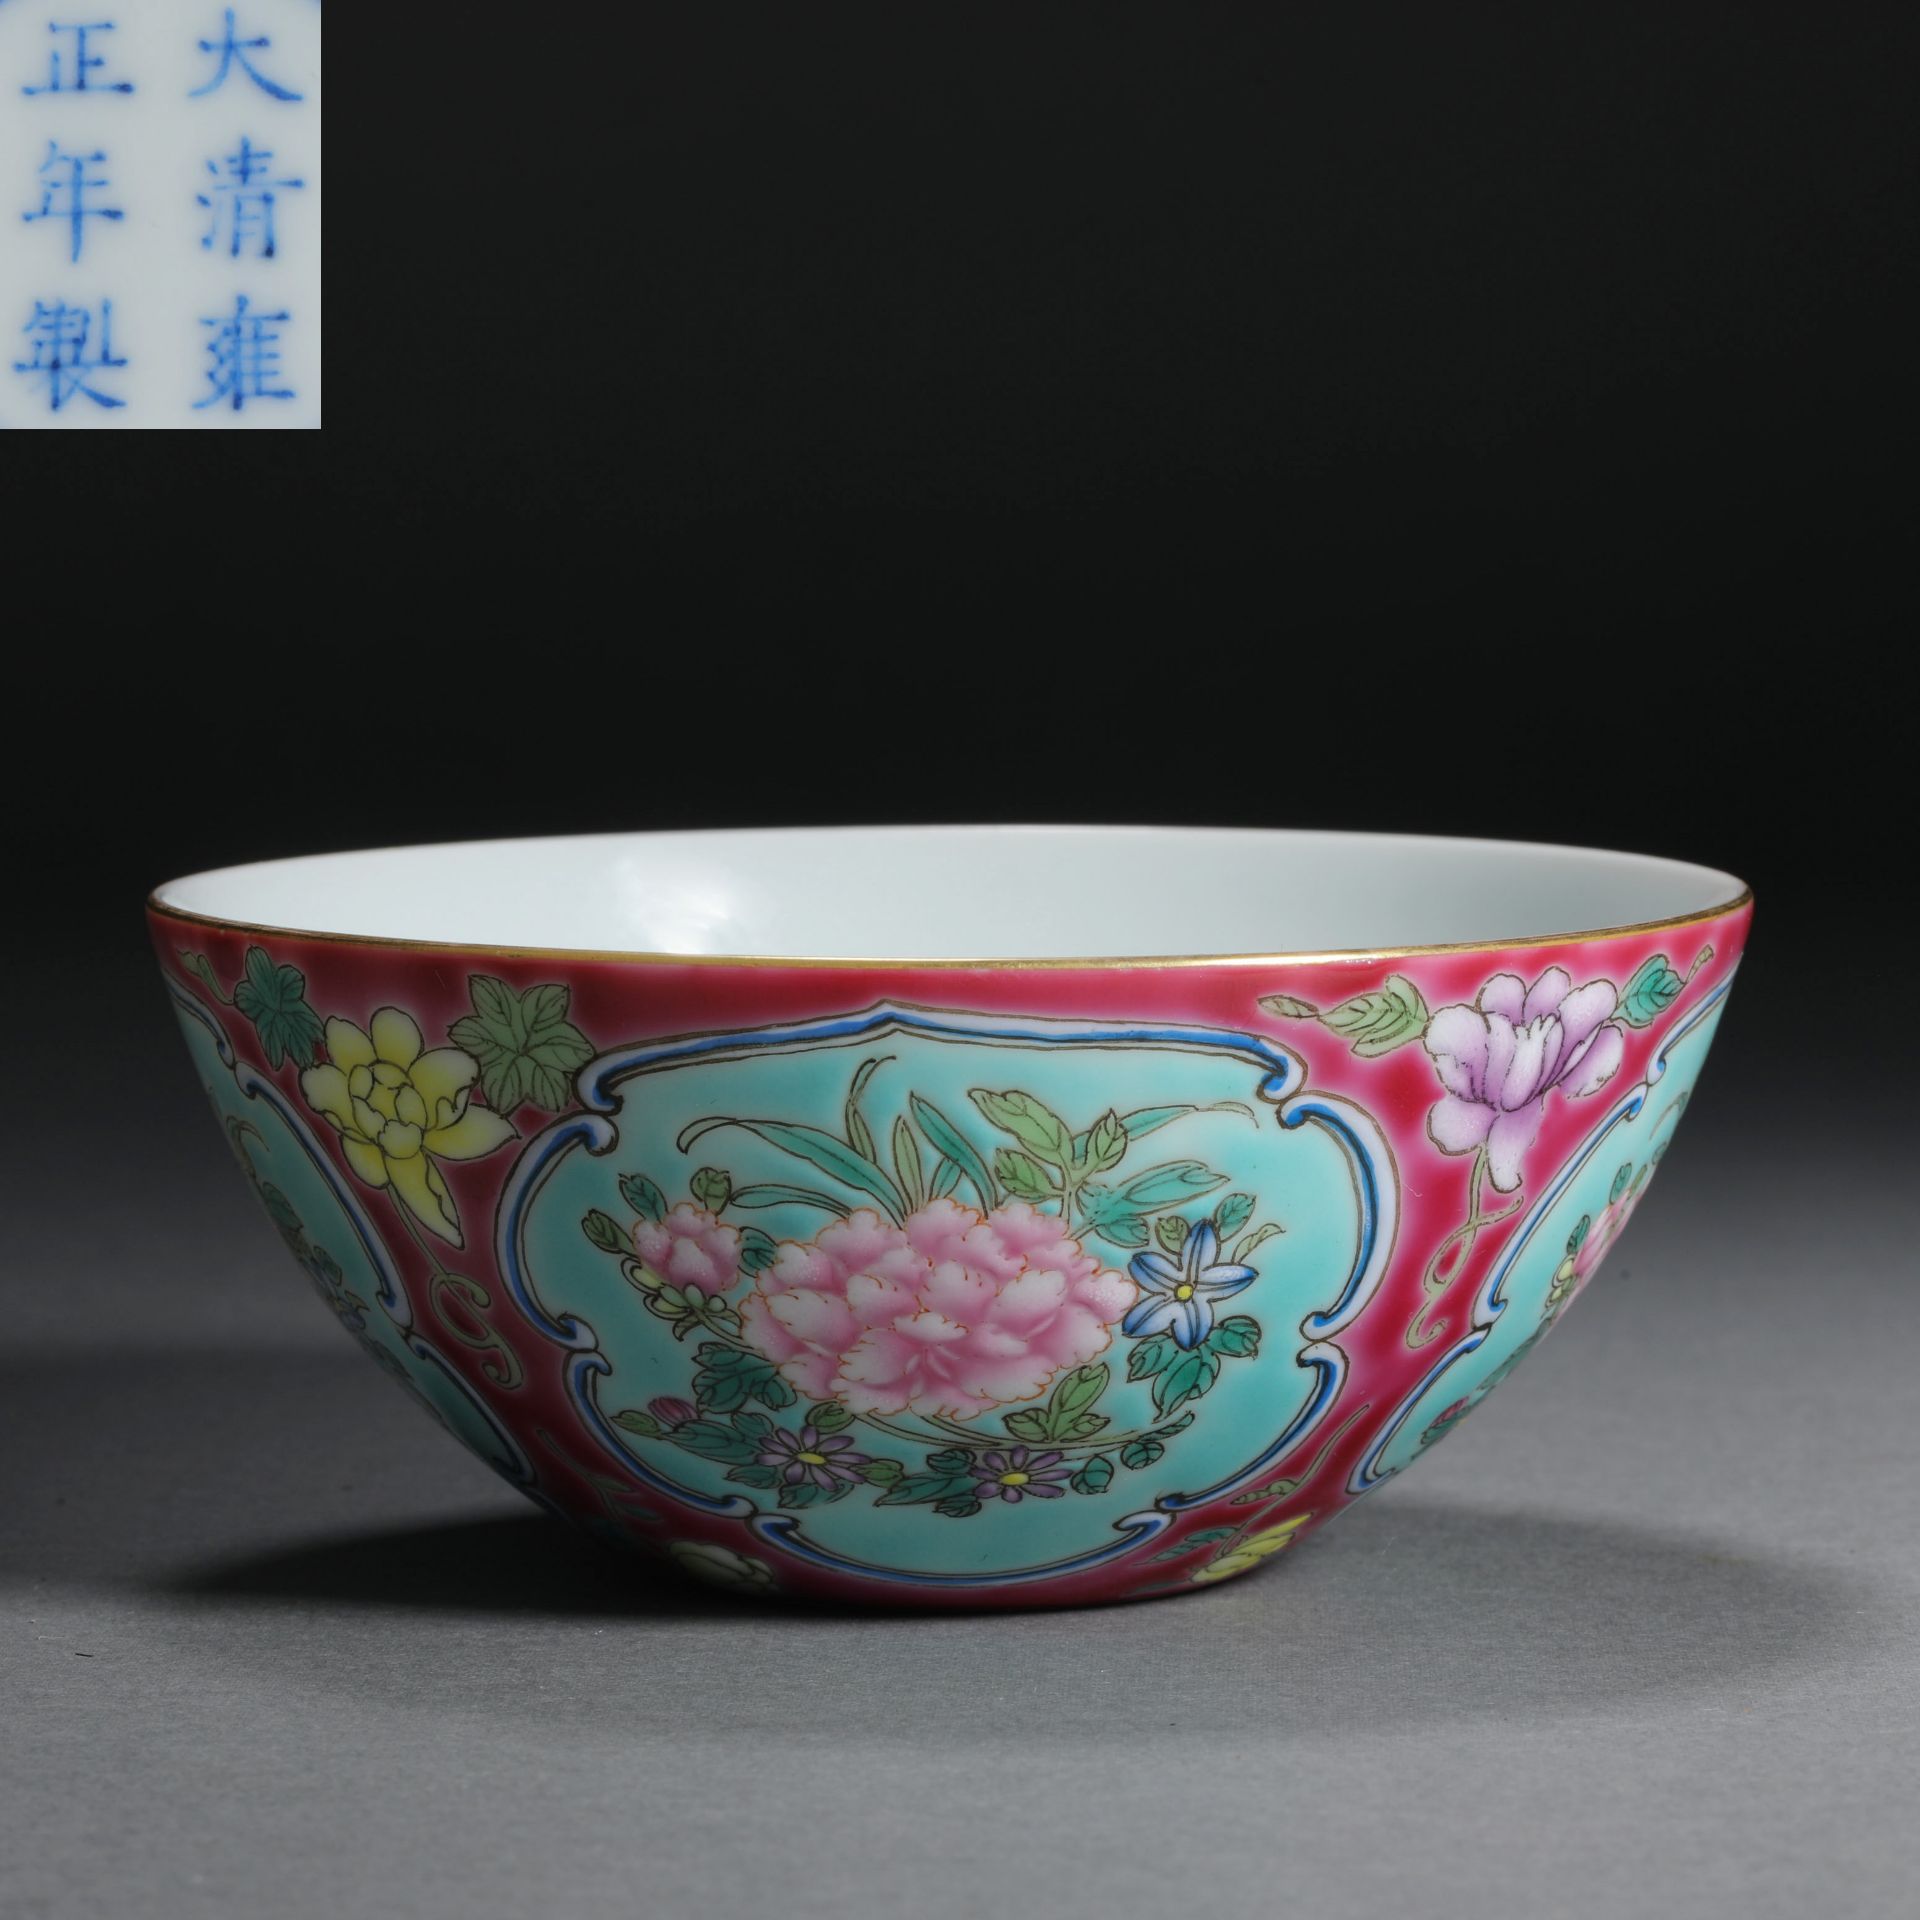 Qing dynasty coral red glaze window painting pastel bowl